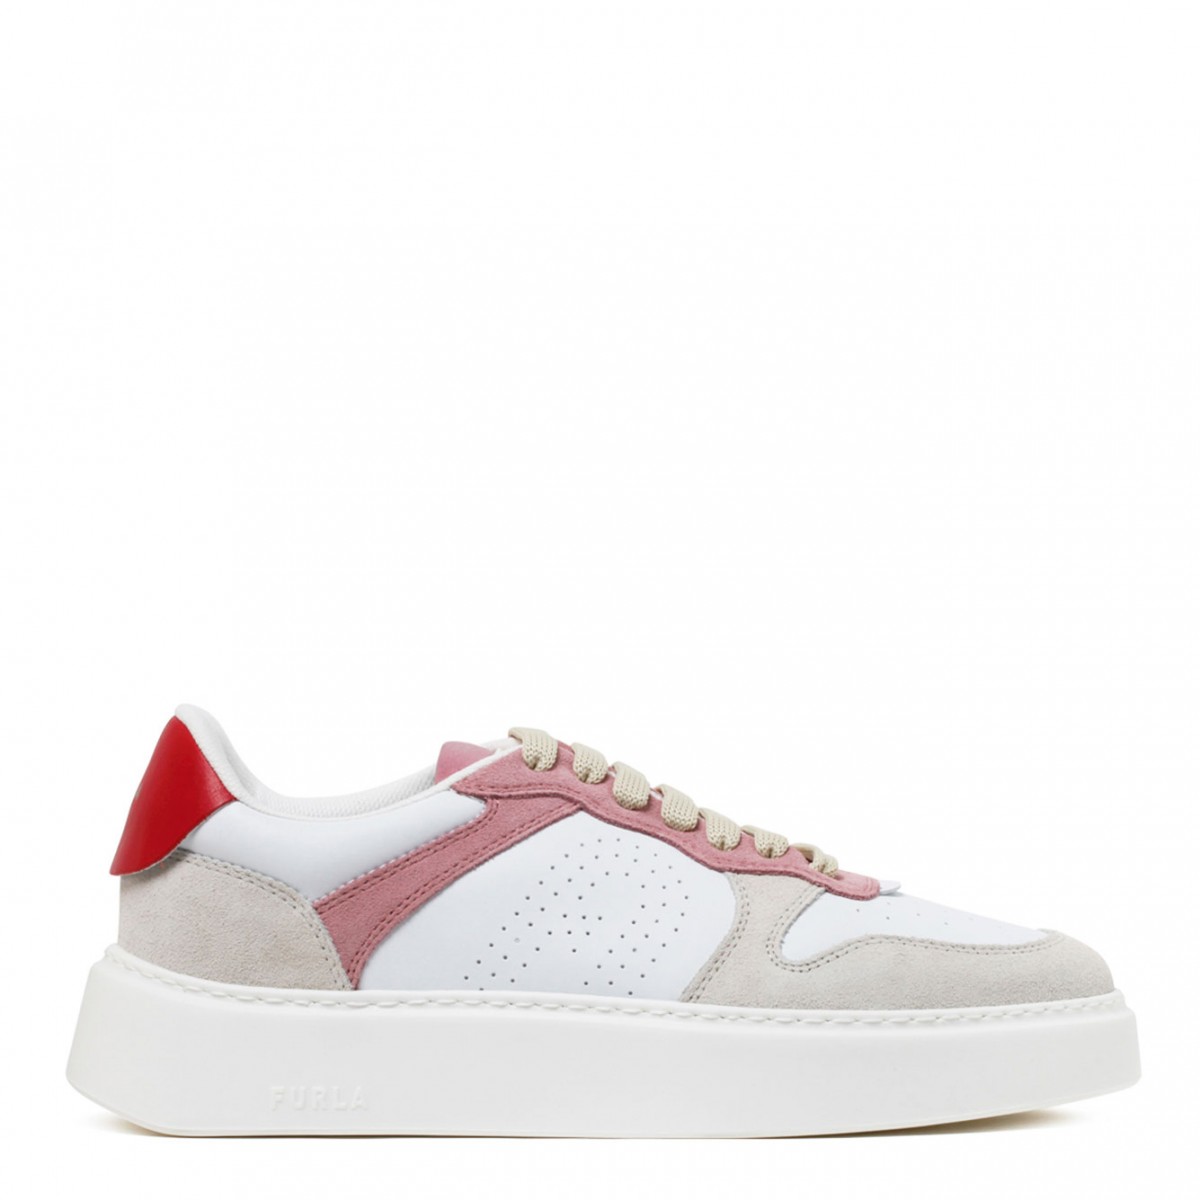 Off-white, Pink and Red Sneakers